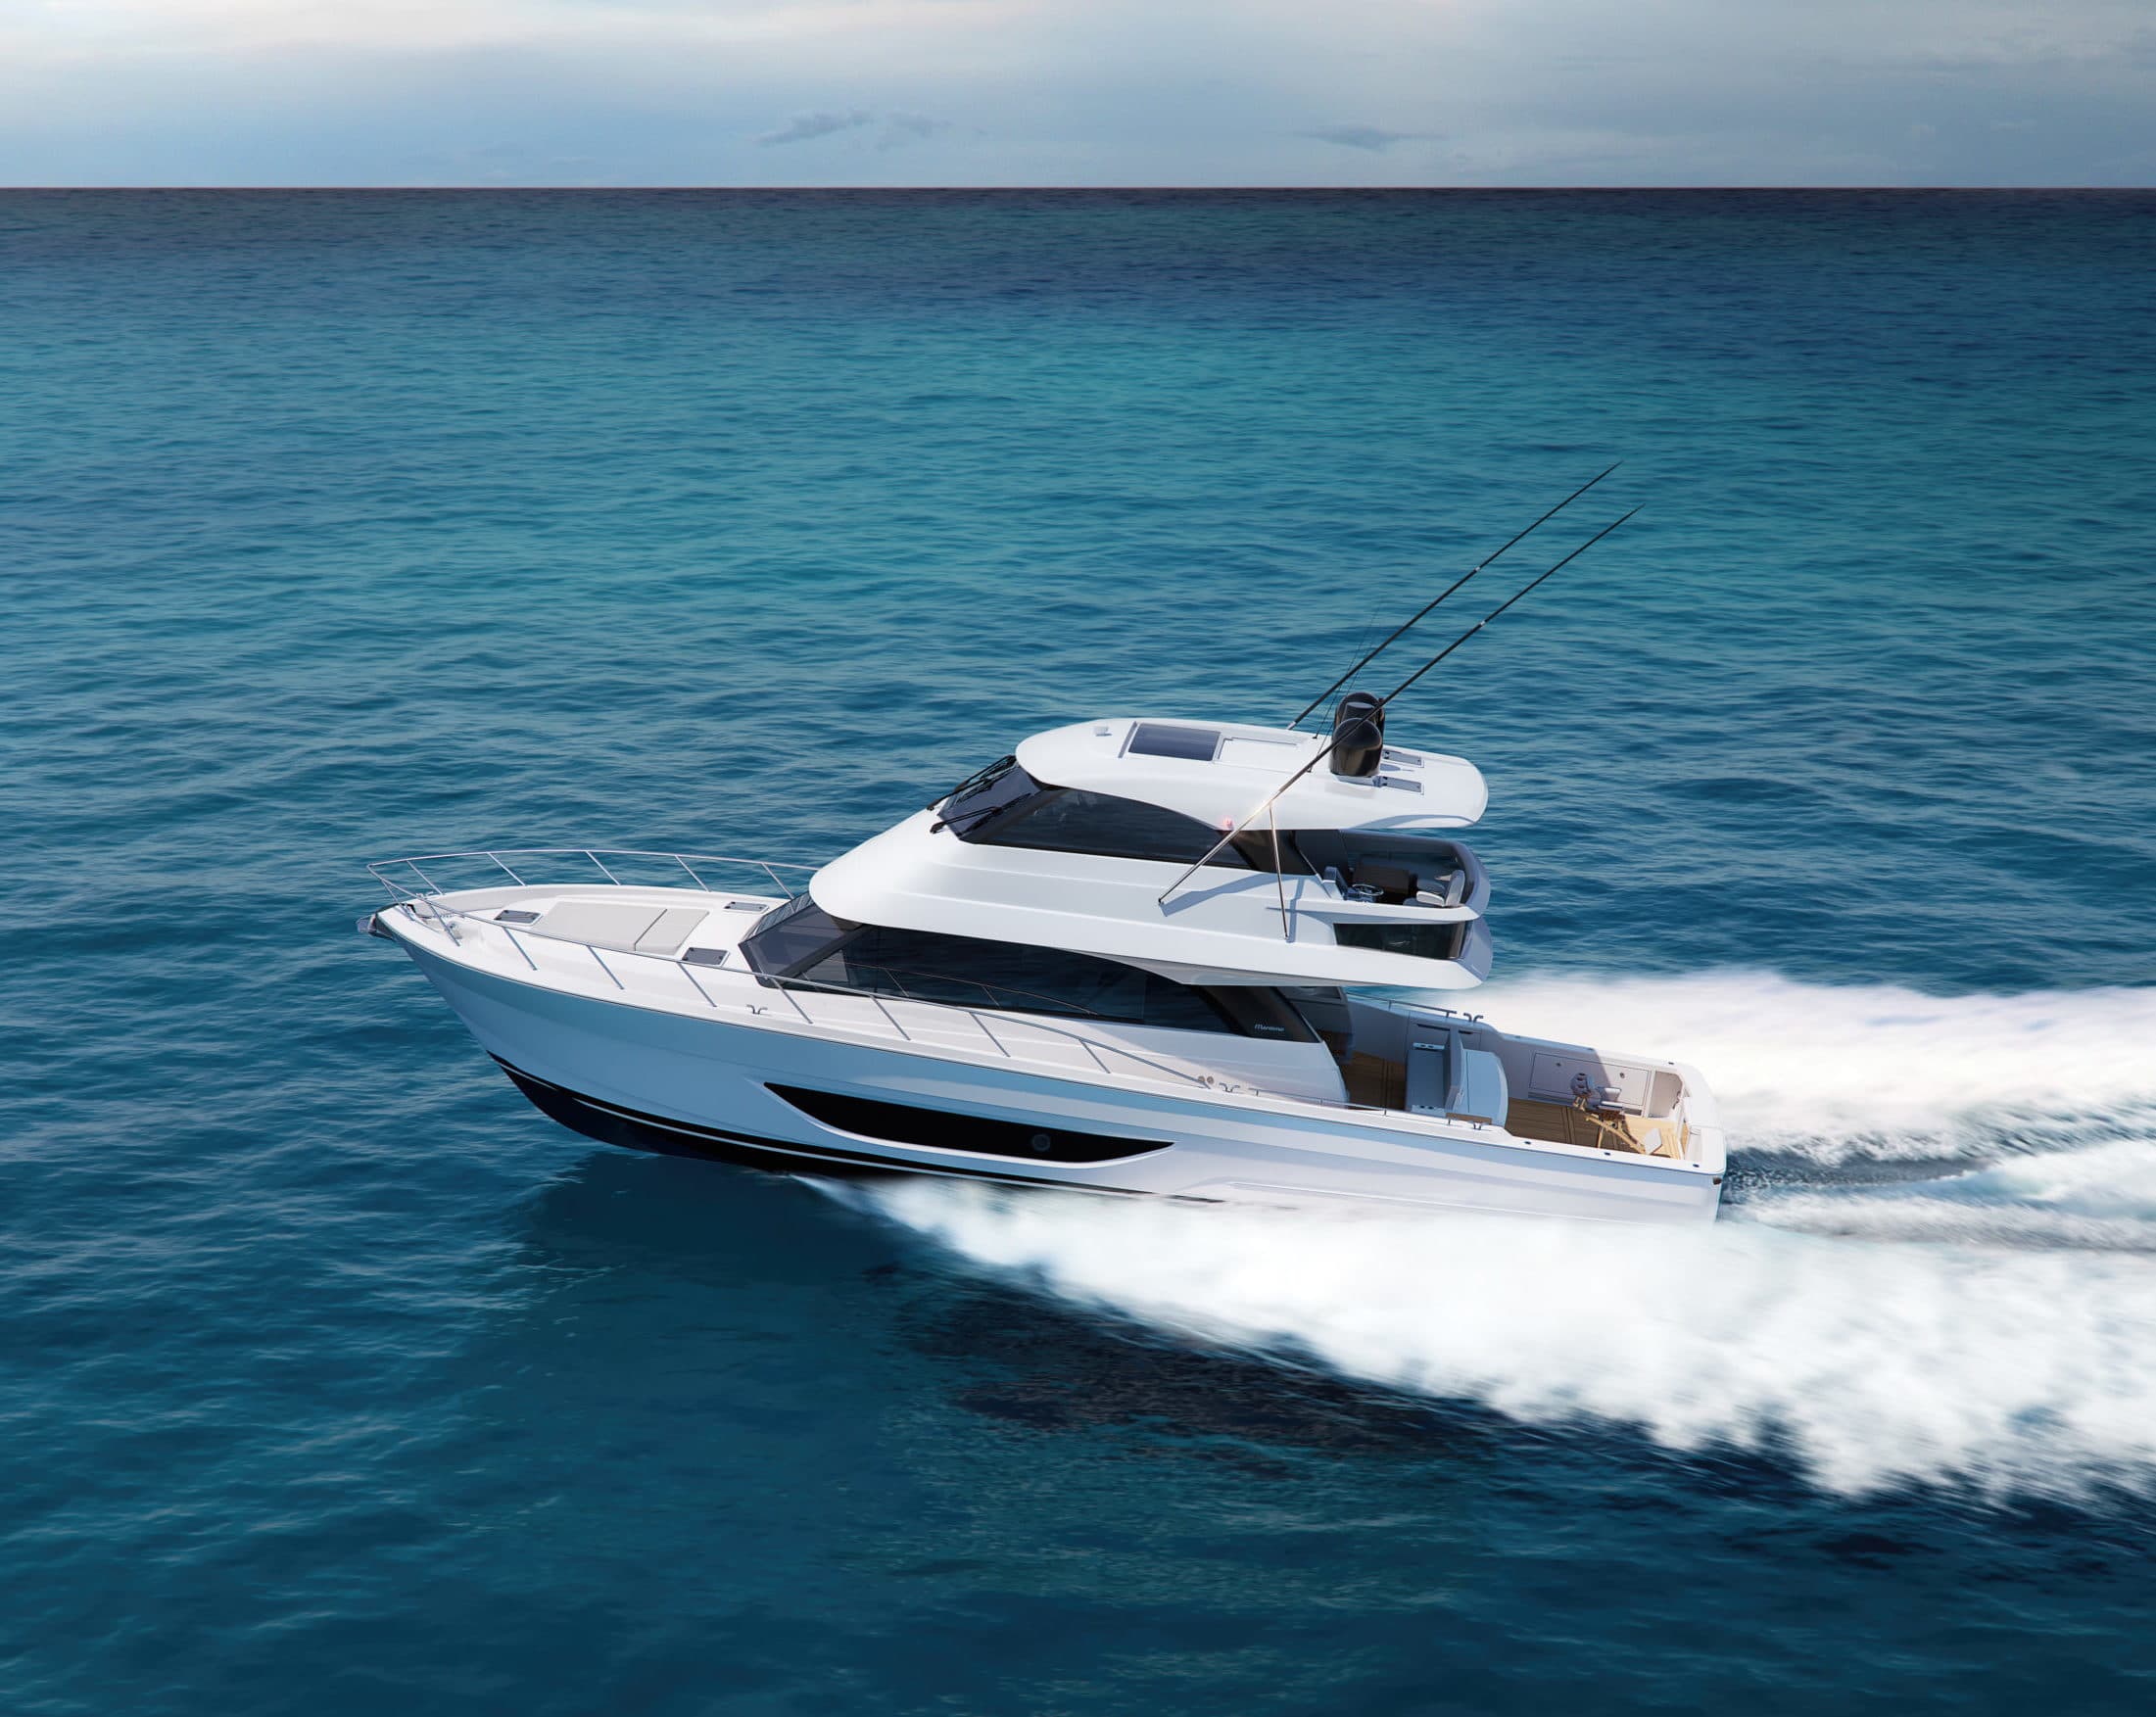 GLOBAL REVEAL | M600 OFFSHORE MOTOR YACHT